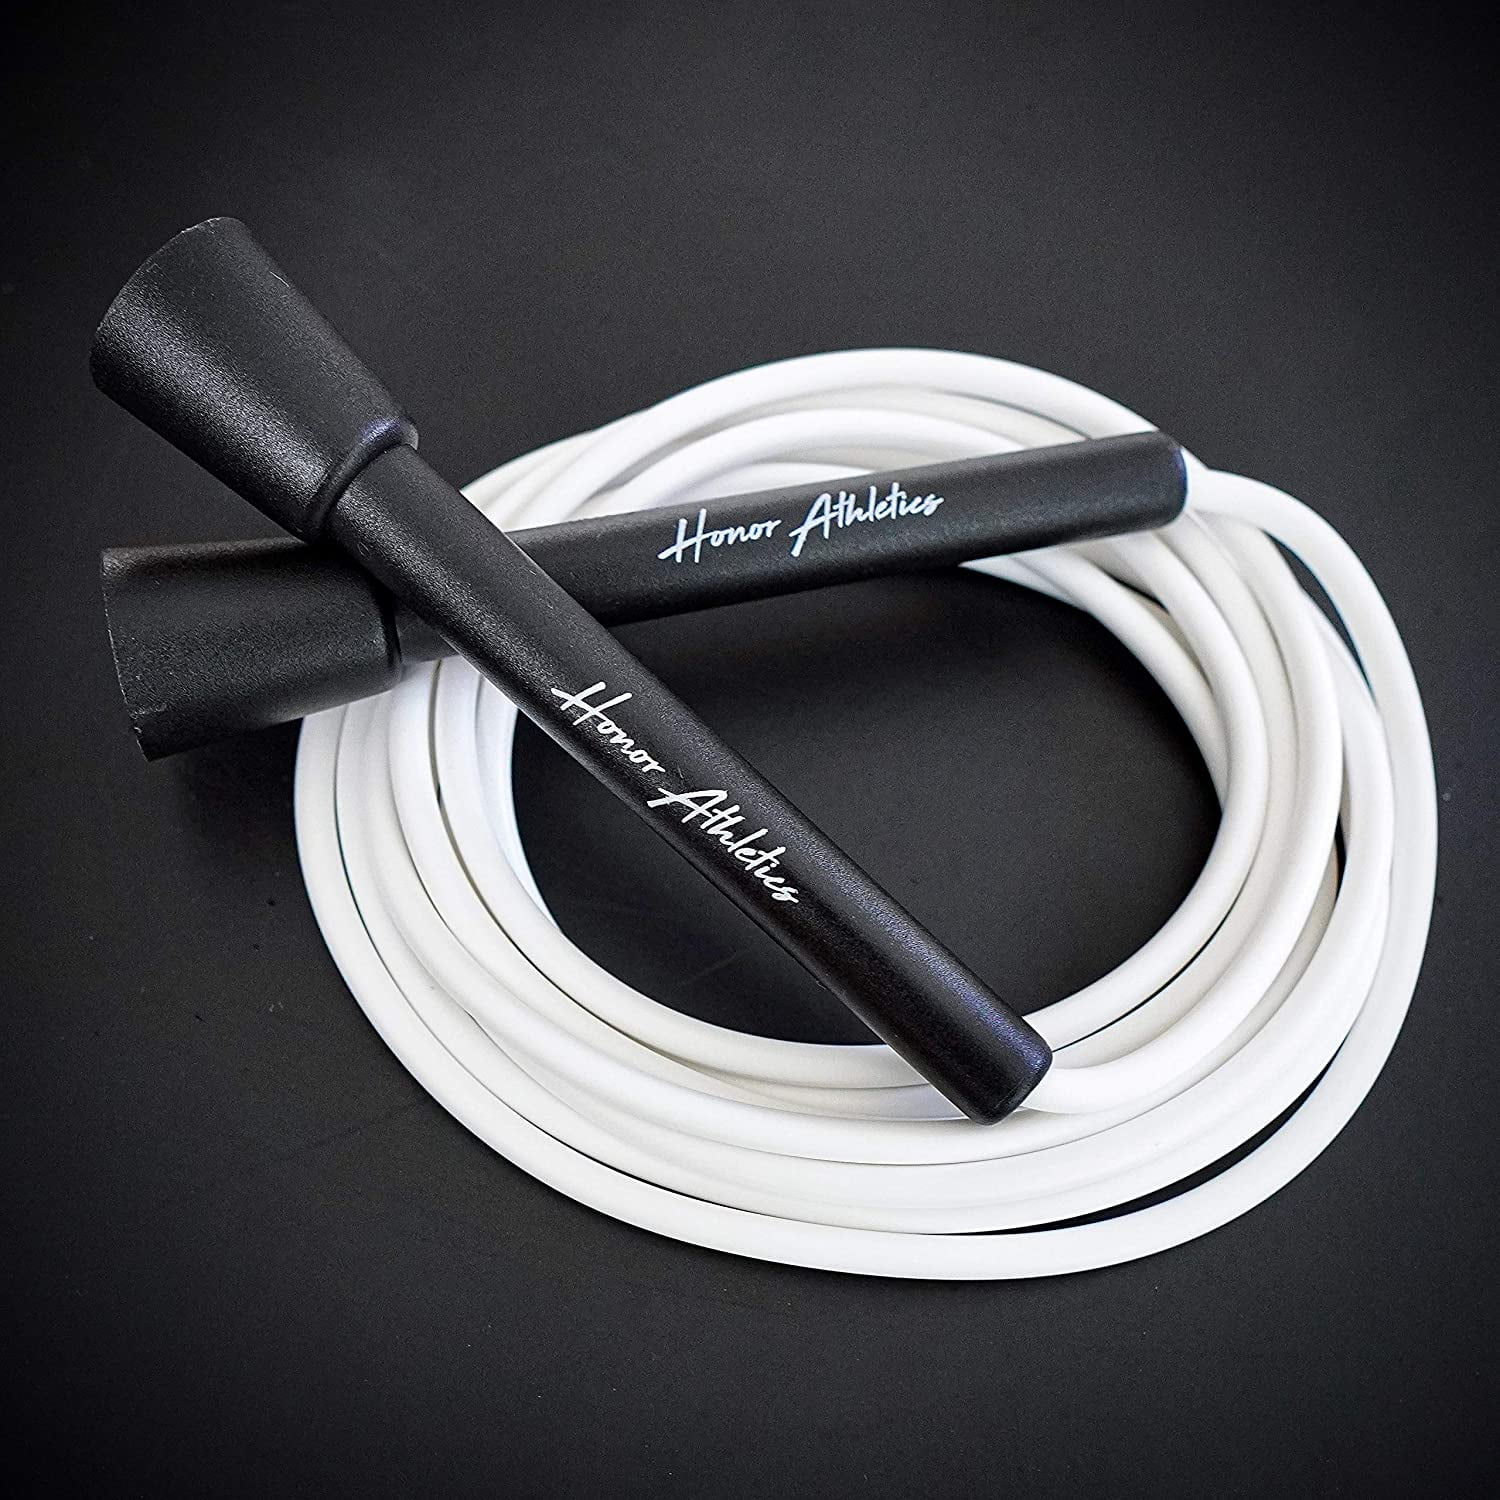 Weighted Jump Rope for Fitness Sports Boxing MMA Training Suitable for Double-Under Cross-Over High Speed Skipping Rope Jump-rope 